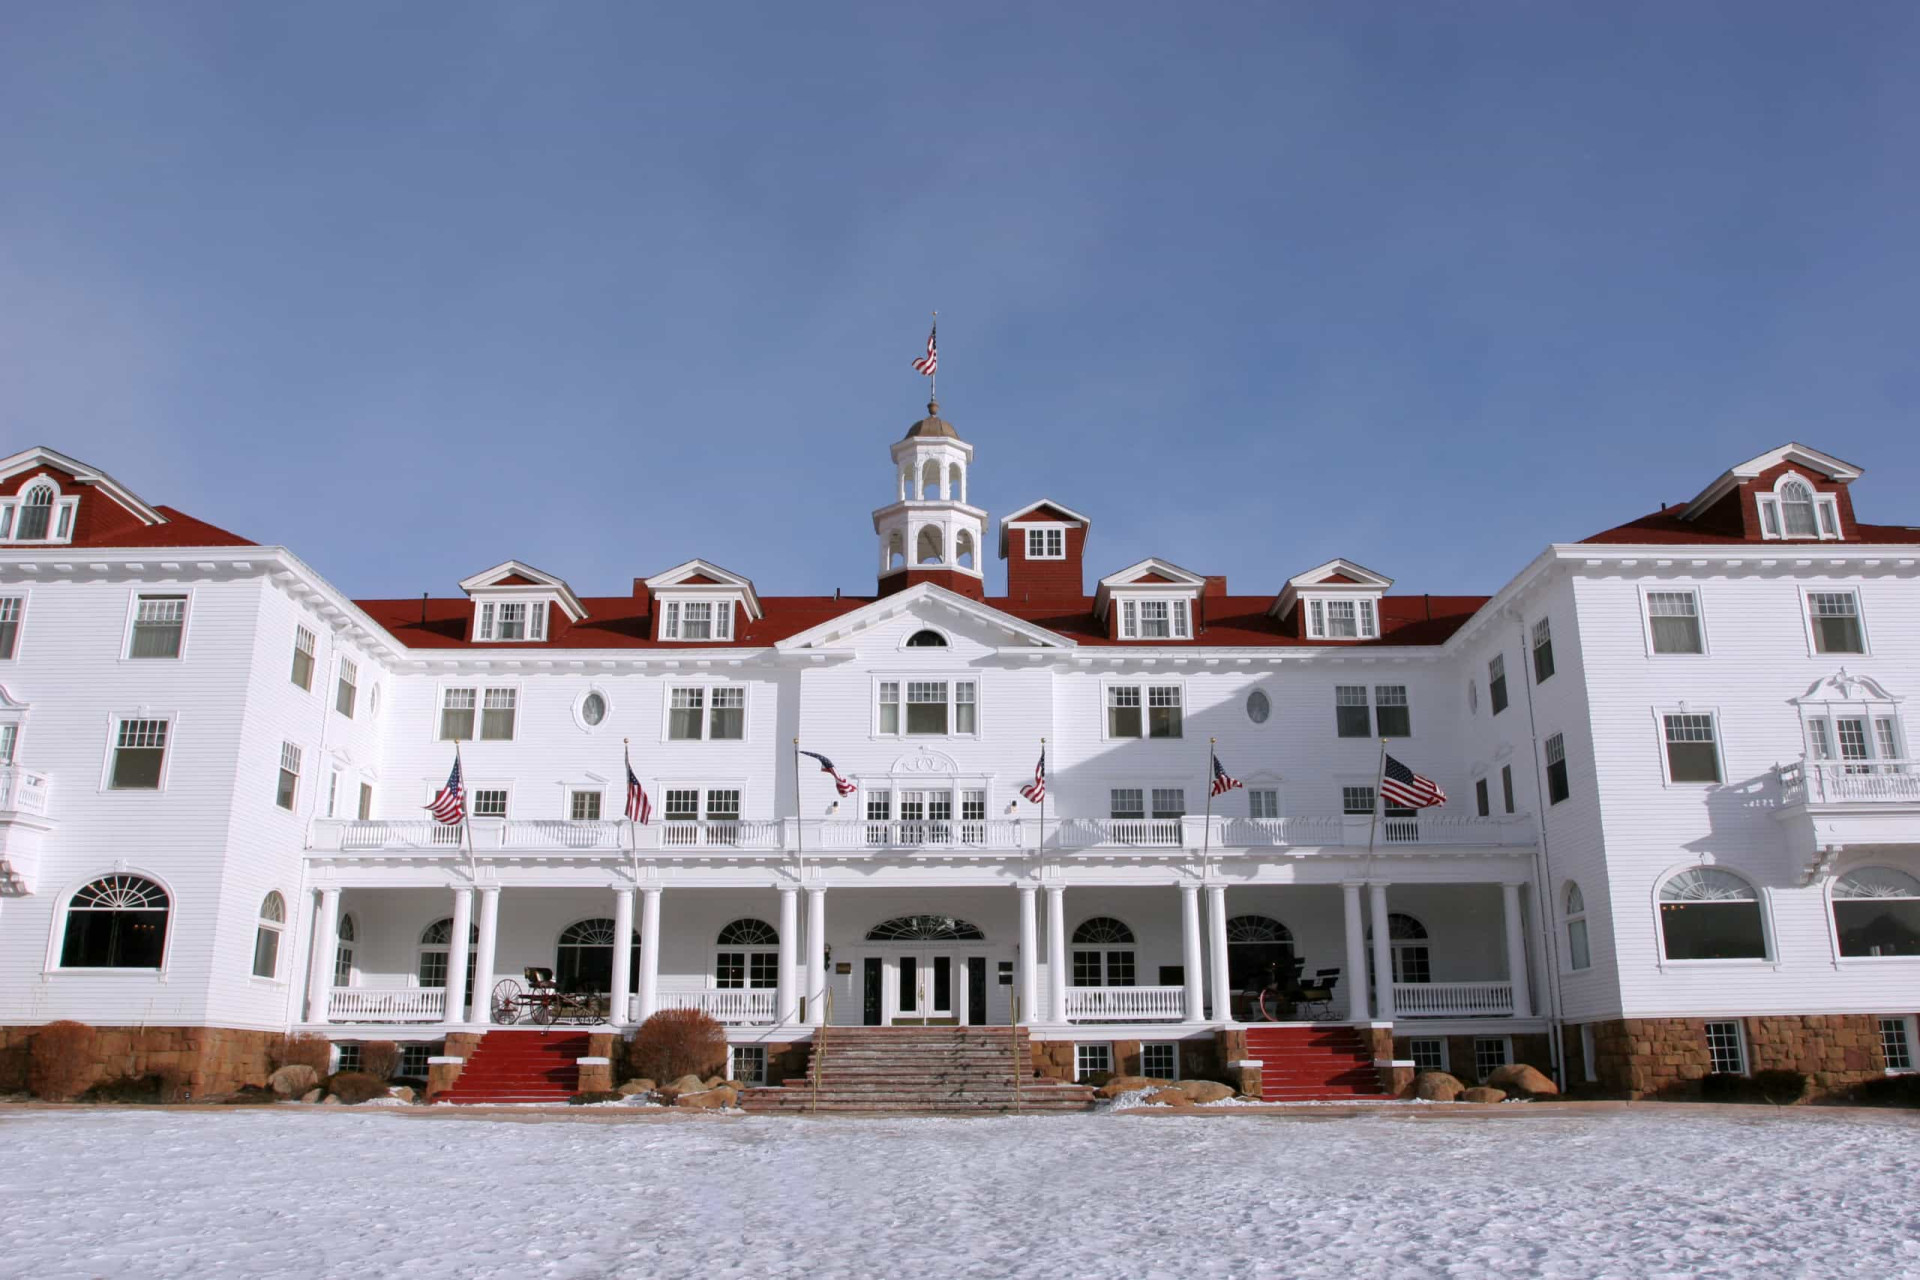 <p>The Stanley Hotel in Estes Park is the number one spot when it comes to haunted places in Colorado. So much so, in fact, that it was the inspiration for Stephen King's 'The Shining.' King actually spent the night in the infamous room 217.</p><p>You may also like:<a href="https://www.starsinsider.com/n/284870?utm_source=msn.com&utm_medium=display&utm_campaign=referral_description&utm_content=505450en-ae"> Authors who hated their movie adaptations</a></p>